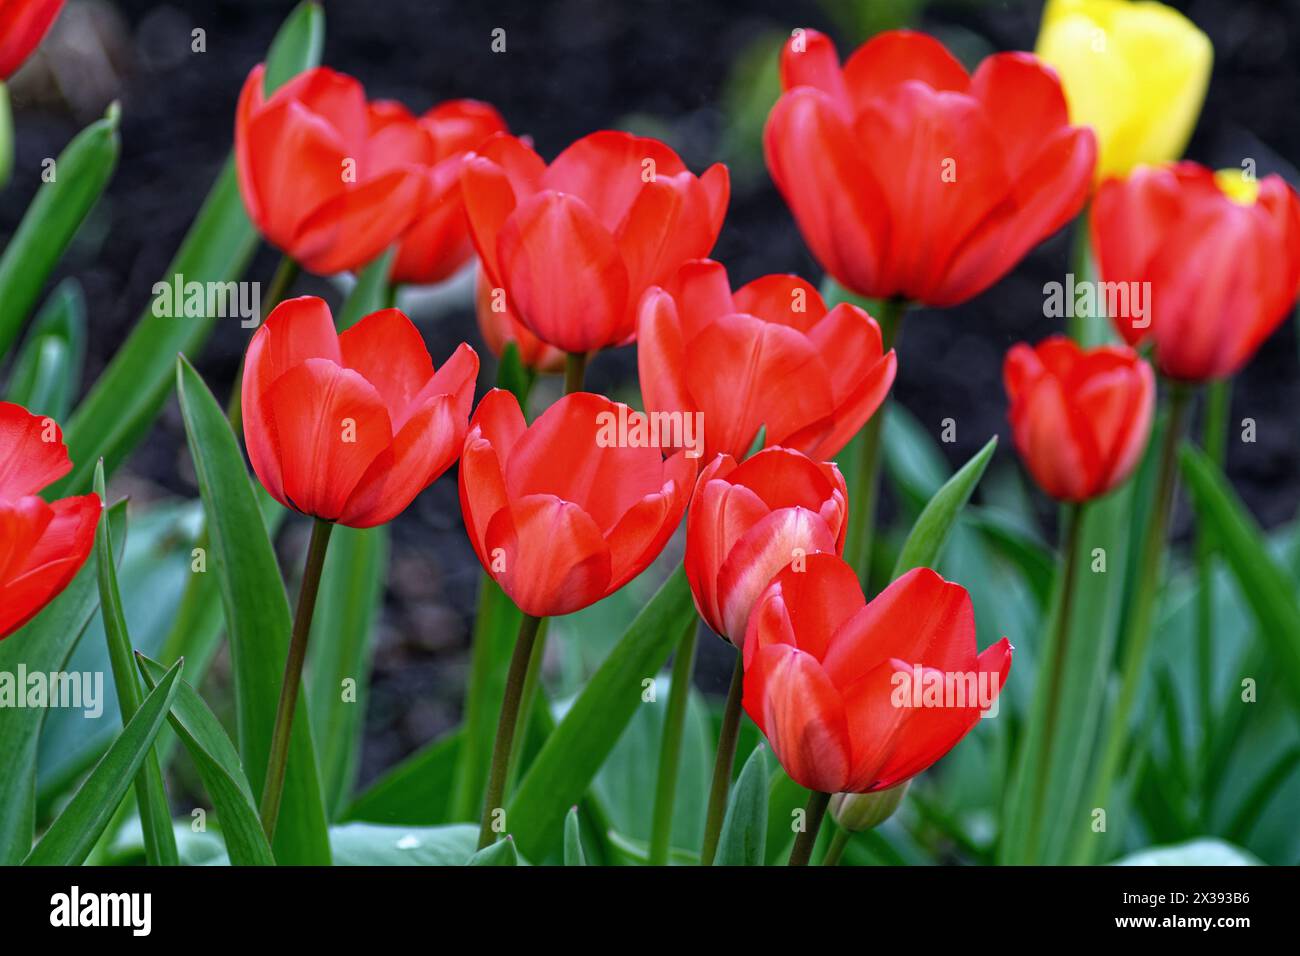 Close up of red Tulip flowers with yellow ones in background forming  abstract shapes Stock Photo